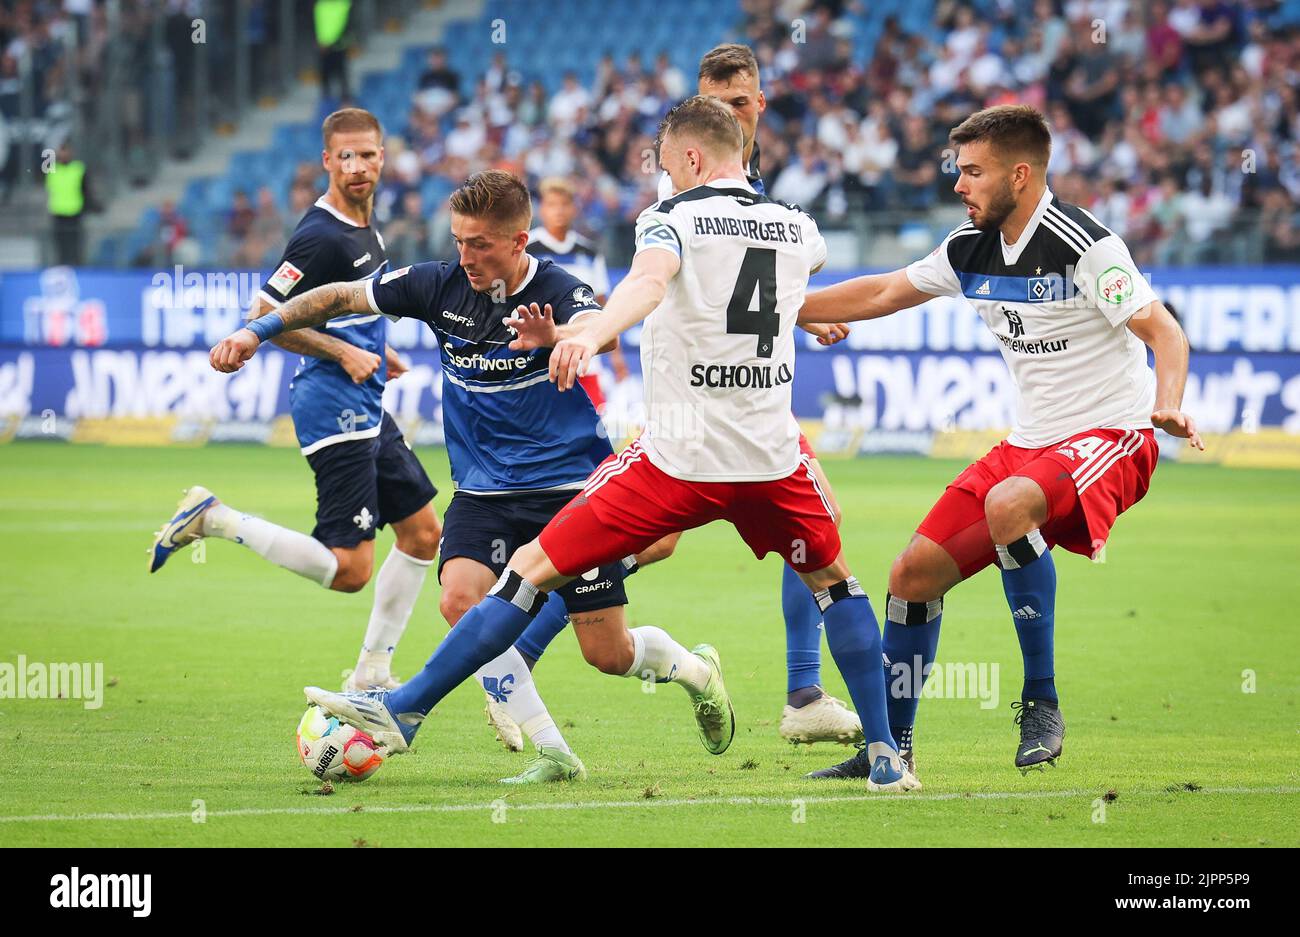 Hamburg, Germany. 19th Aug, 2022. Soccer: 2nd Bundesliga, Matchday 5, Hamburger SV - Darmstadt 98 at Volksparkstadion. Darmstadt's Marvin Mehlem (2nd from left) and Hamburg's Sebastian Schonlau fight for the ball. Credit: Christian Charisius/dpa - IMPORTANT NOTE: In accordance with the requirements of the DFL Deutsche Fußball Liga and the DFB Deutscher Fußball-Bund, it is prohibited to use or have used photographs taken in the stadium and/or of the match in the form of sequence pictures and/or video-like photo series./dpa/Alamy Live News Stock Photo